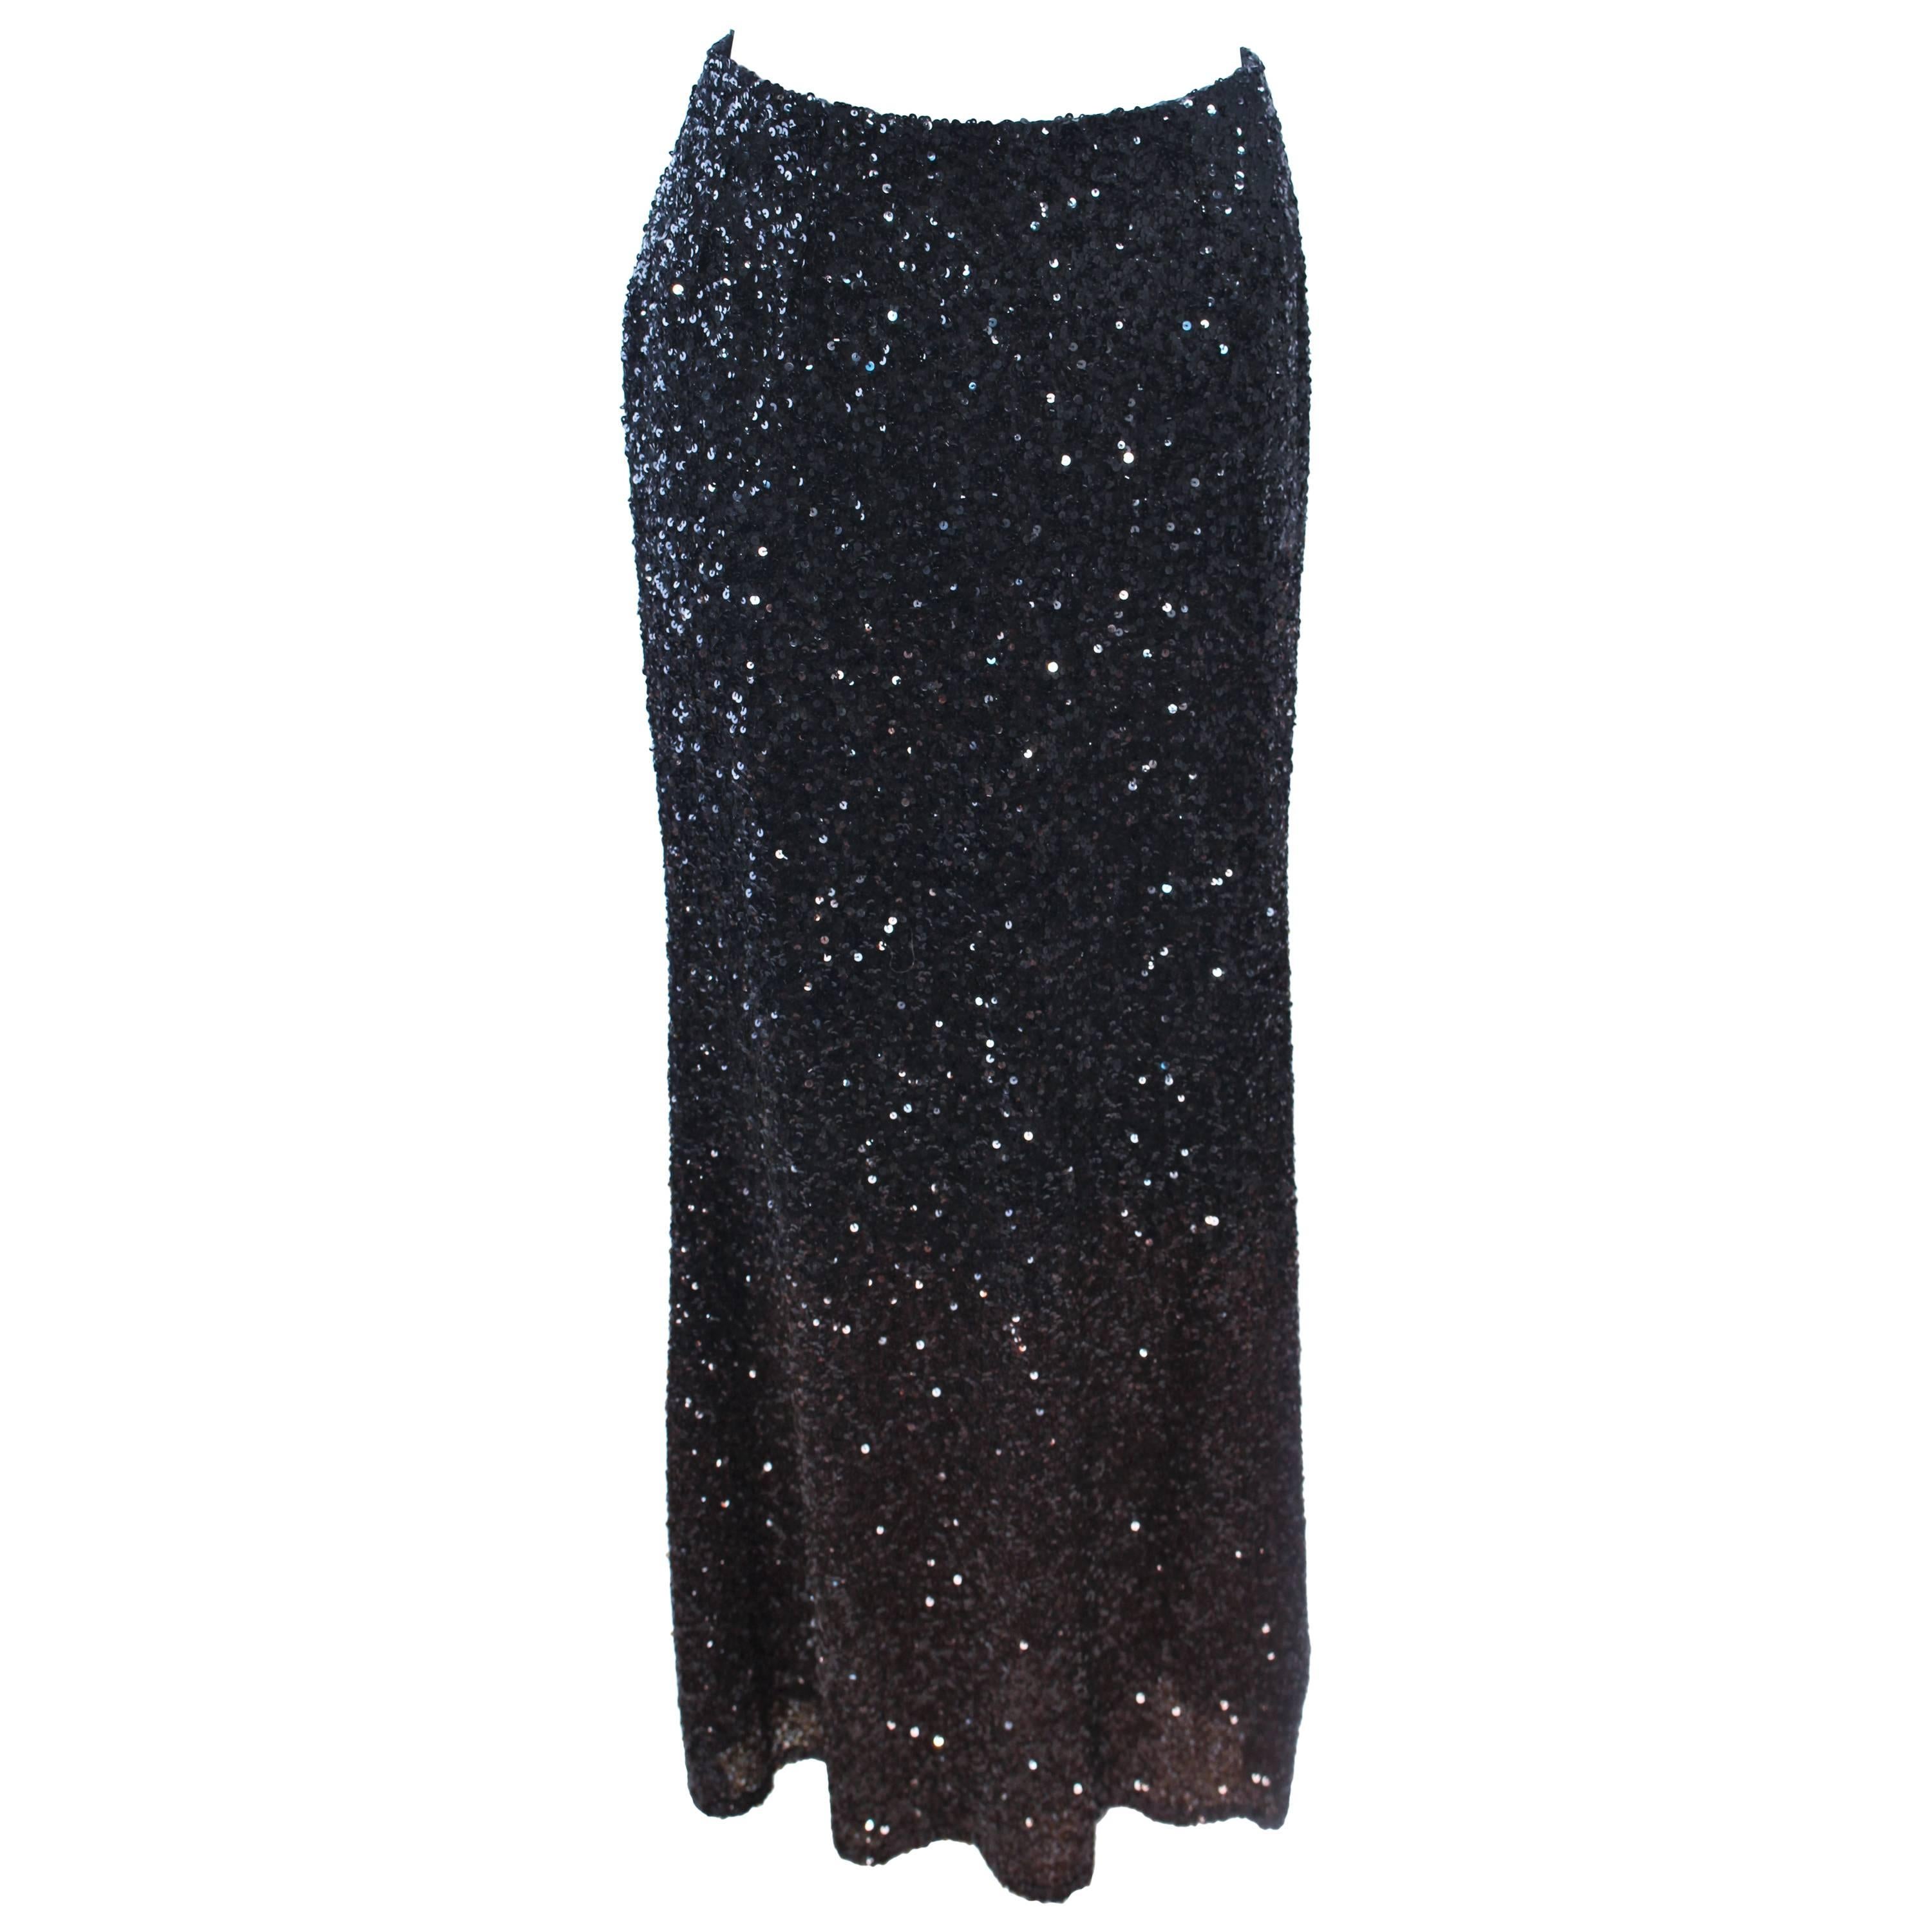 BILL BLASS Black and Brown Sequin Ombre Skirt Size 6 For Sale